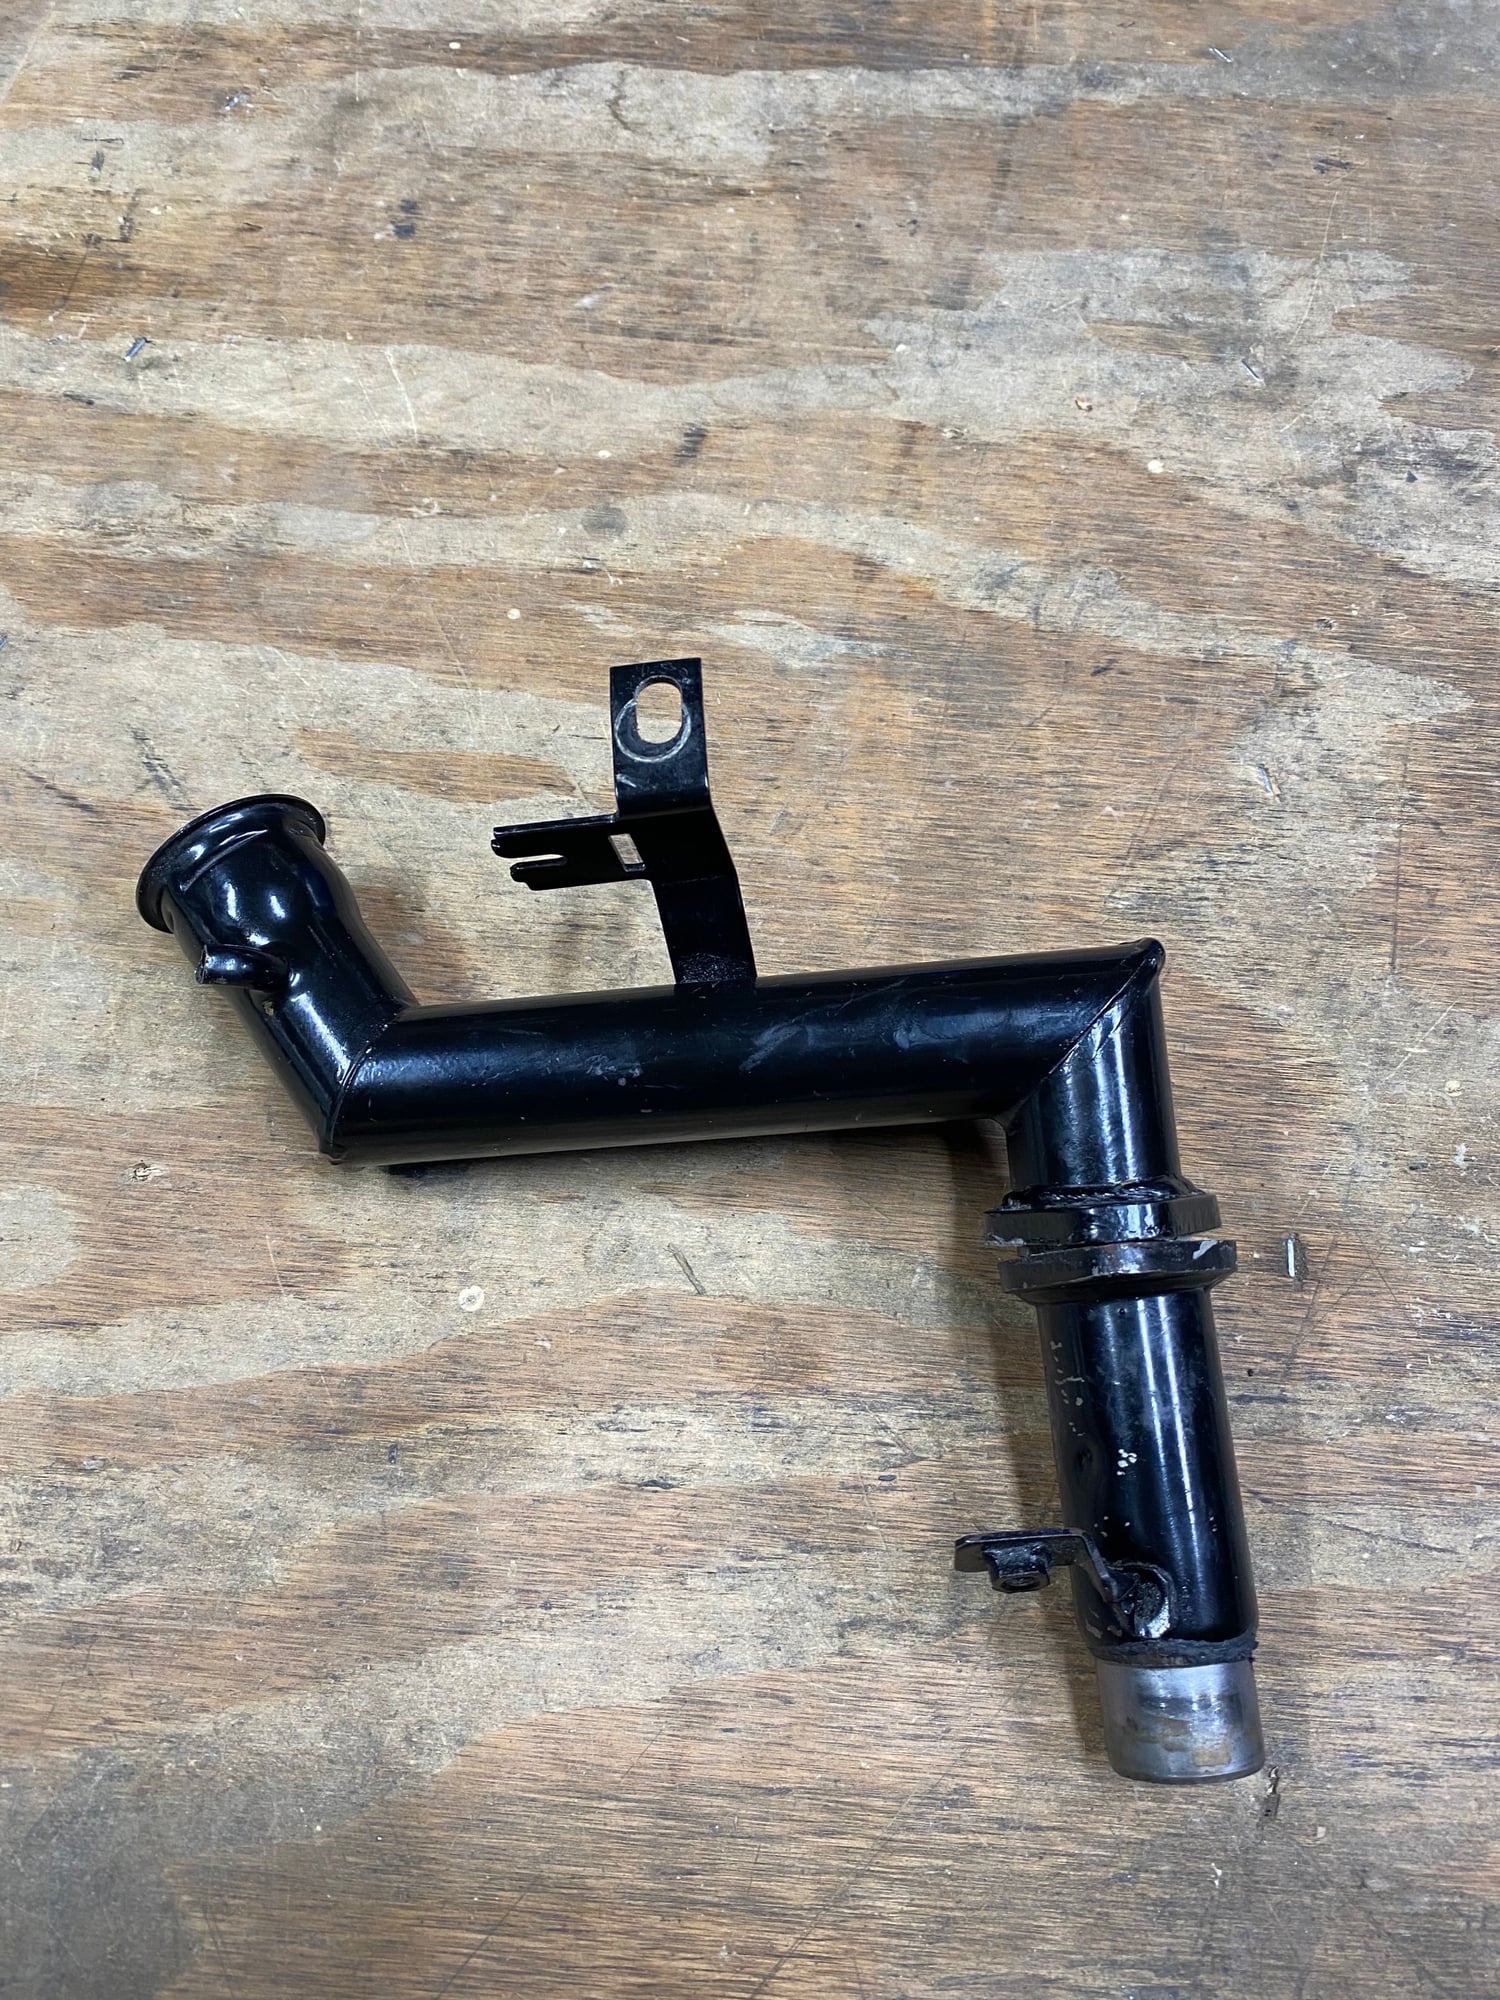 Miscellaneous - Want to buy RX-7 FC Turbo oil Filler and base as pictured - Used - 1987 to 1988 Mazda RX-7 - Prince Frederick, MD 20678, United States